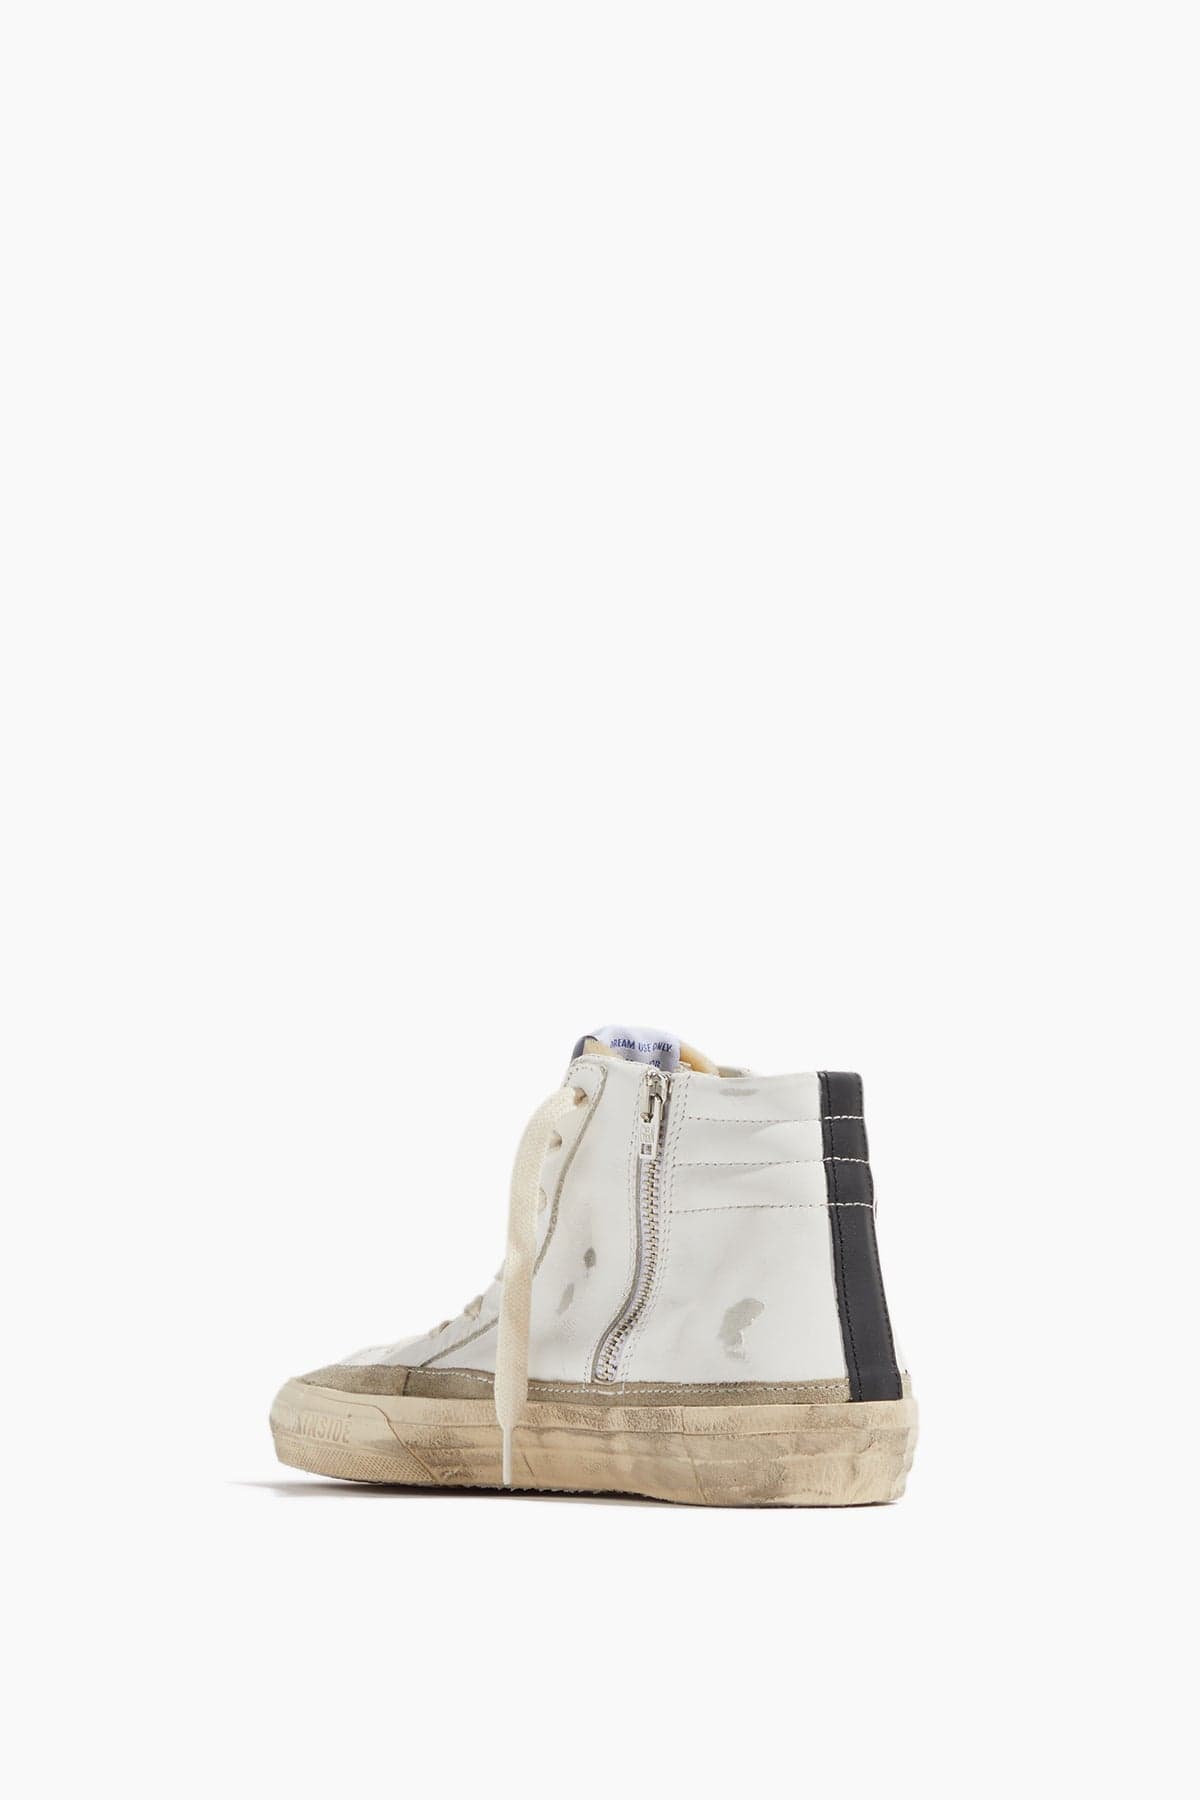 Golden Goose High Top Sneakers Slide Leather Sneaker in White/Yellow/Black/Taupe Golden Goose Shoes Slide Leather Sneaker in White/Yellow/Black/Taupe